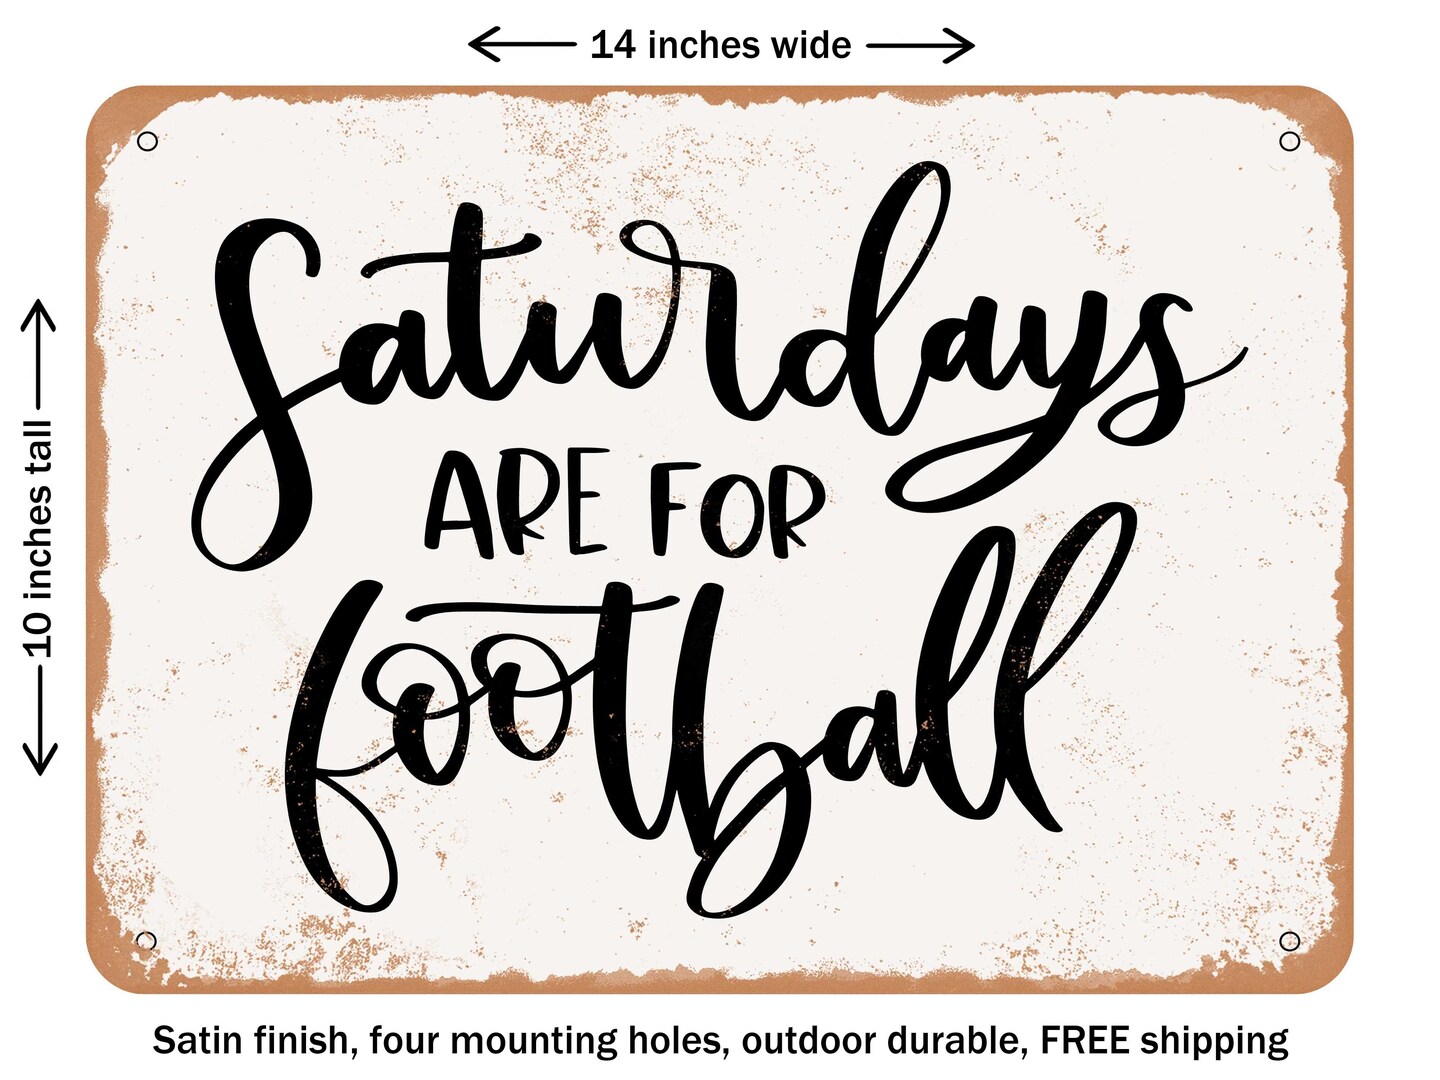 DECORATIVE METAL SIGN - Saturdays Are For Football - Vintage Rusty Look